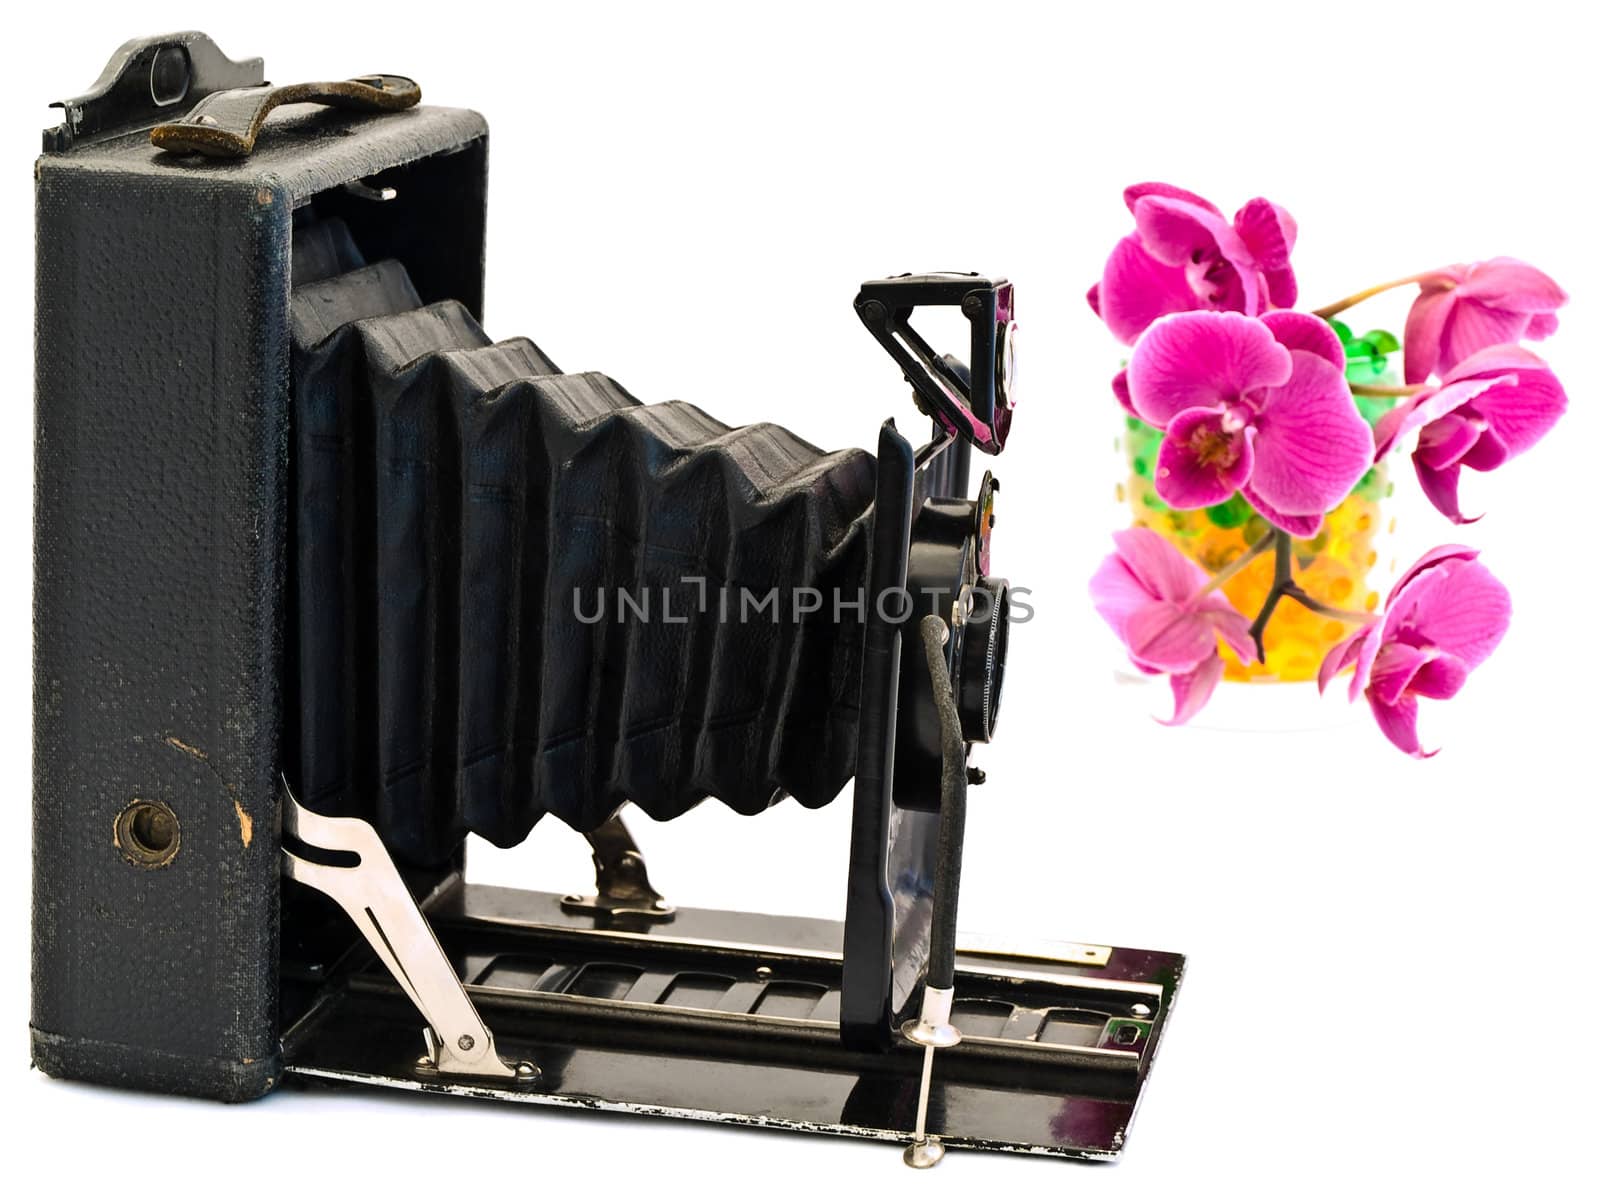 old photo camera against white background with pink orchid flower